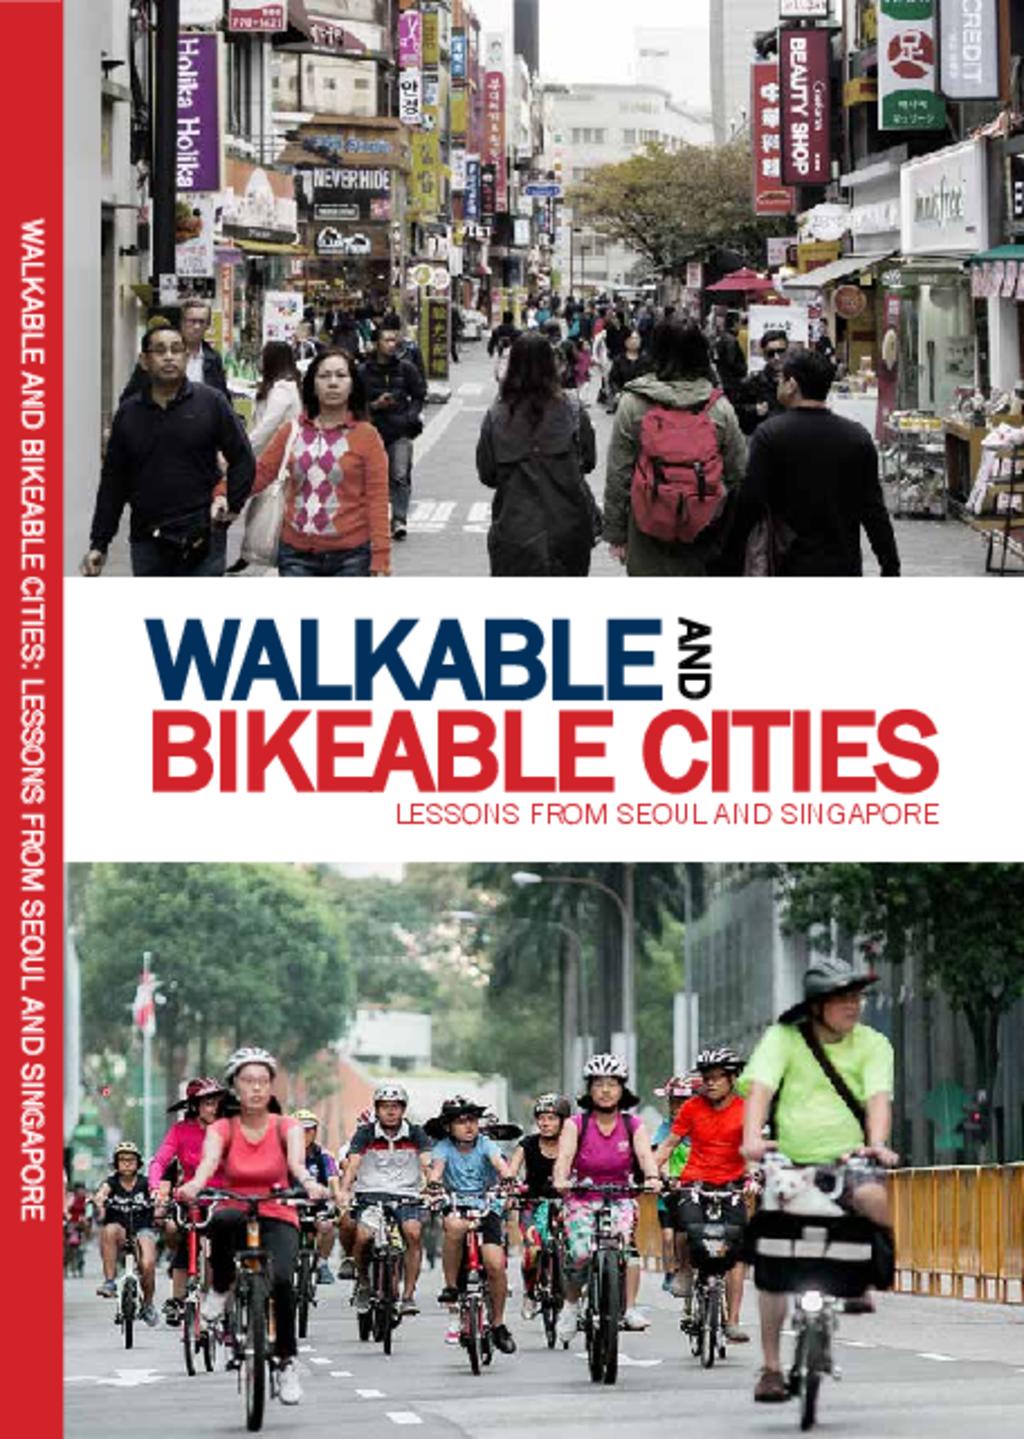 Walkable Cities Seoul and Singapore